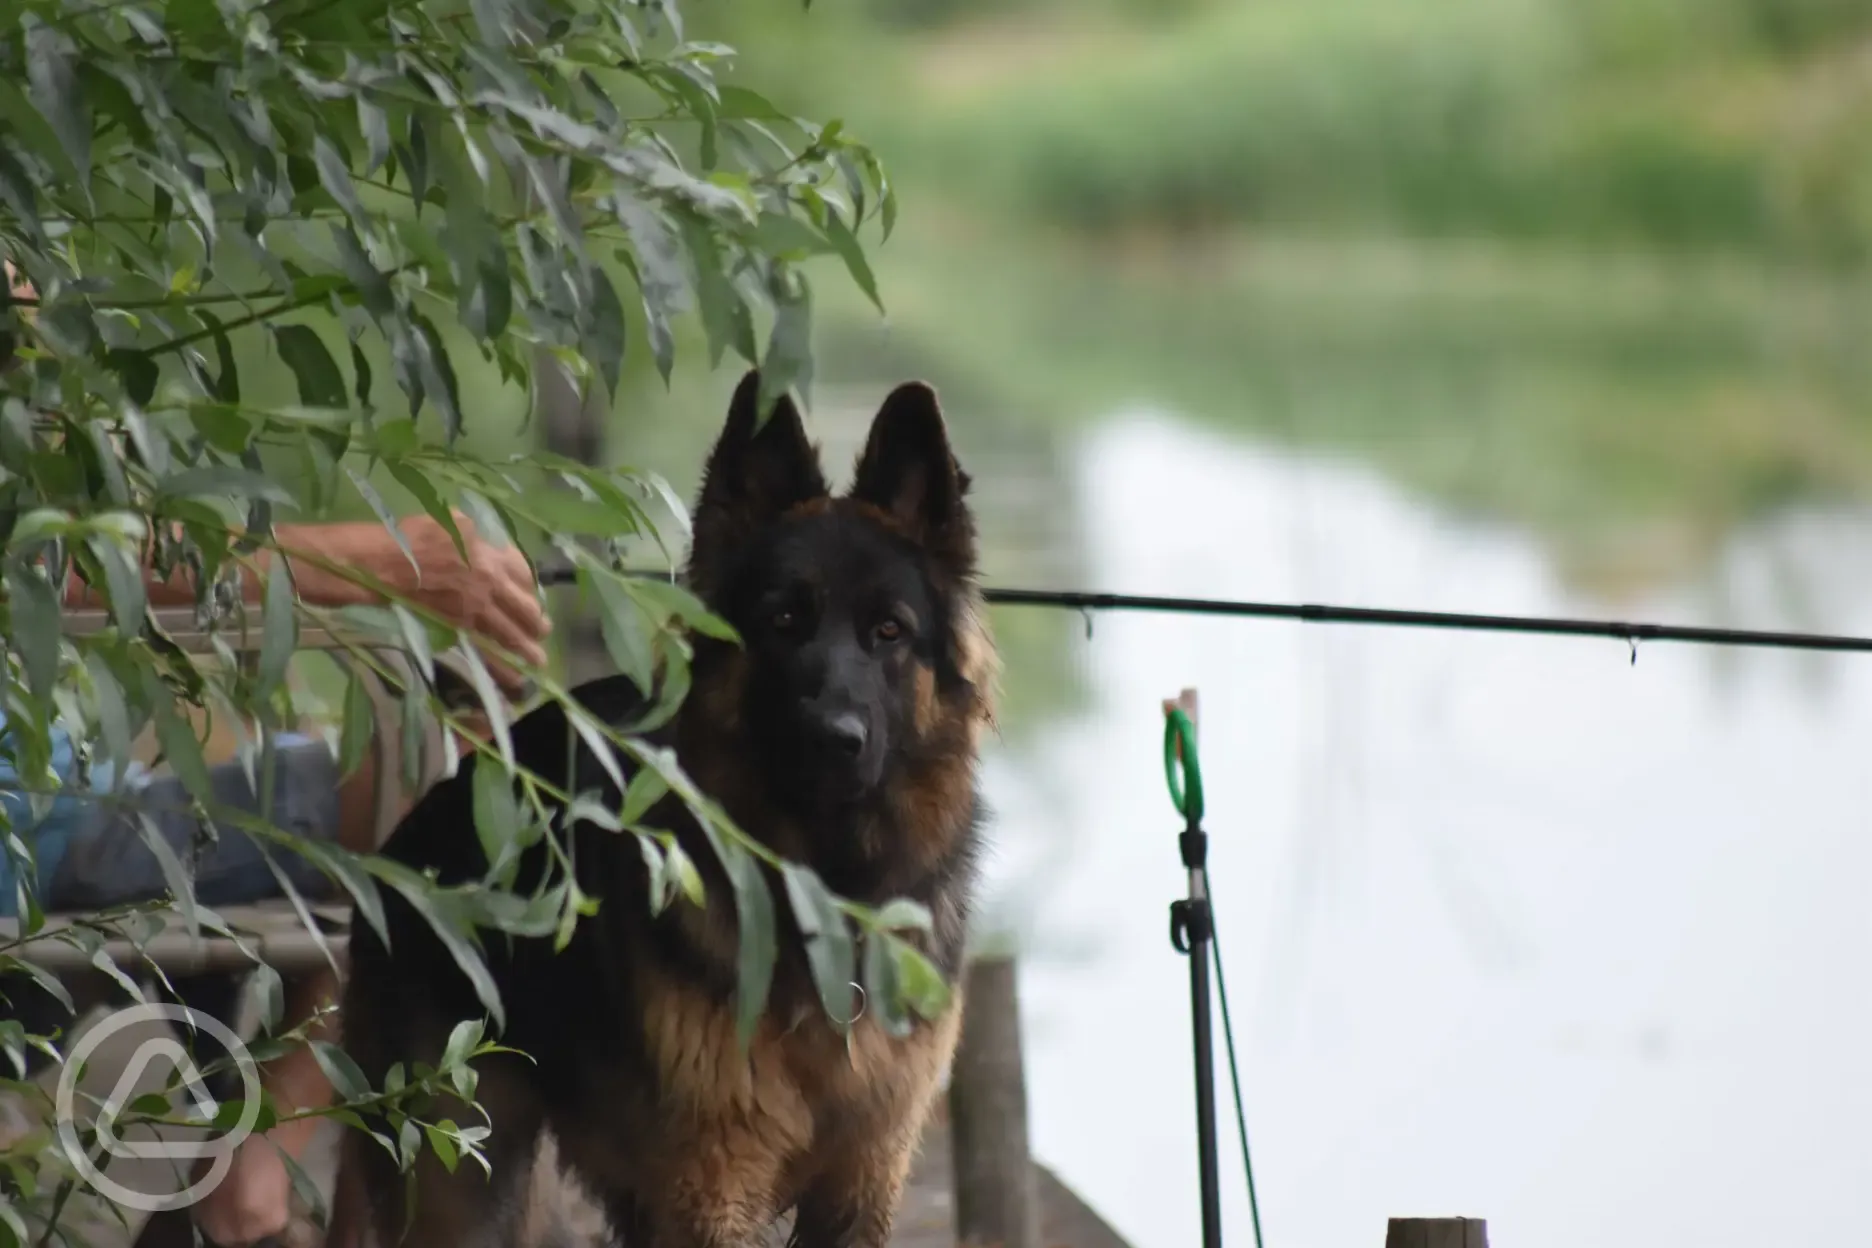 This lovely dog keeping her owner company while they fish